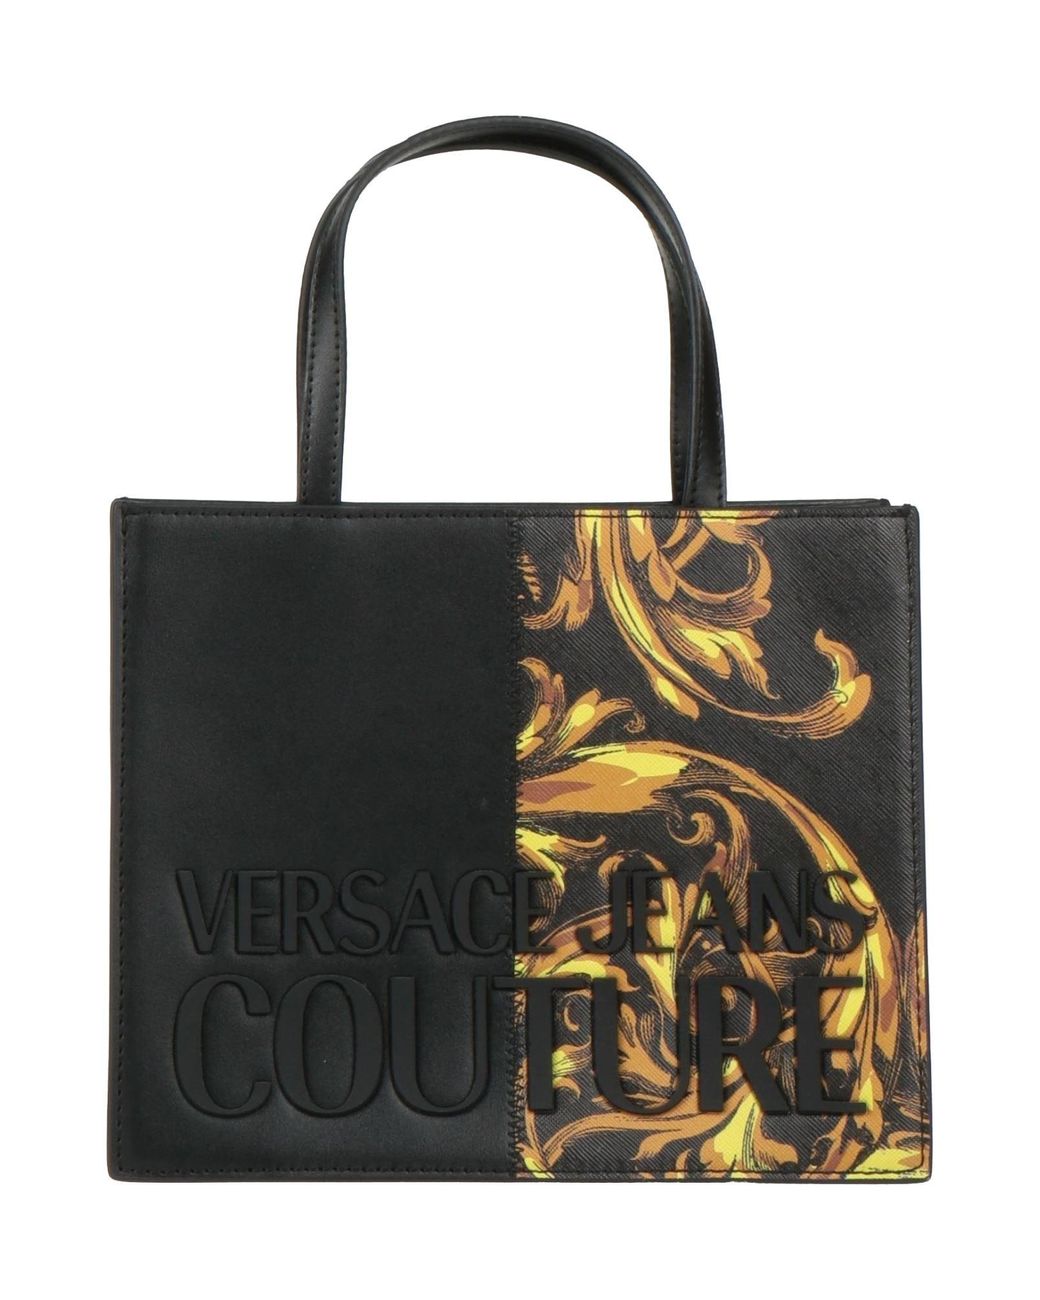 Versace Jeans Couture Handbag in Black | Lyst